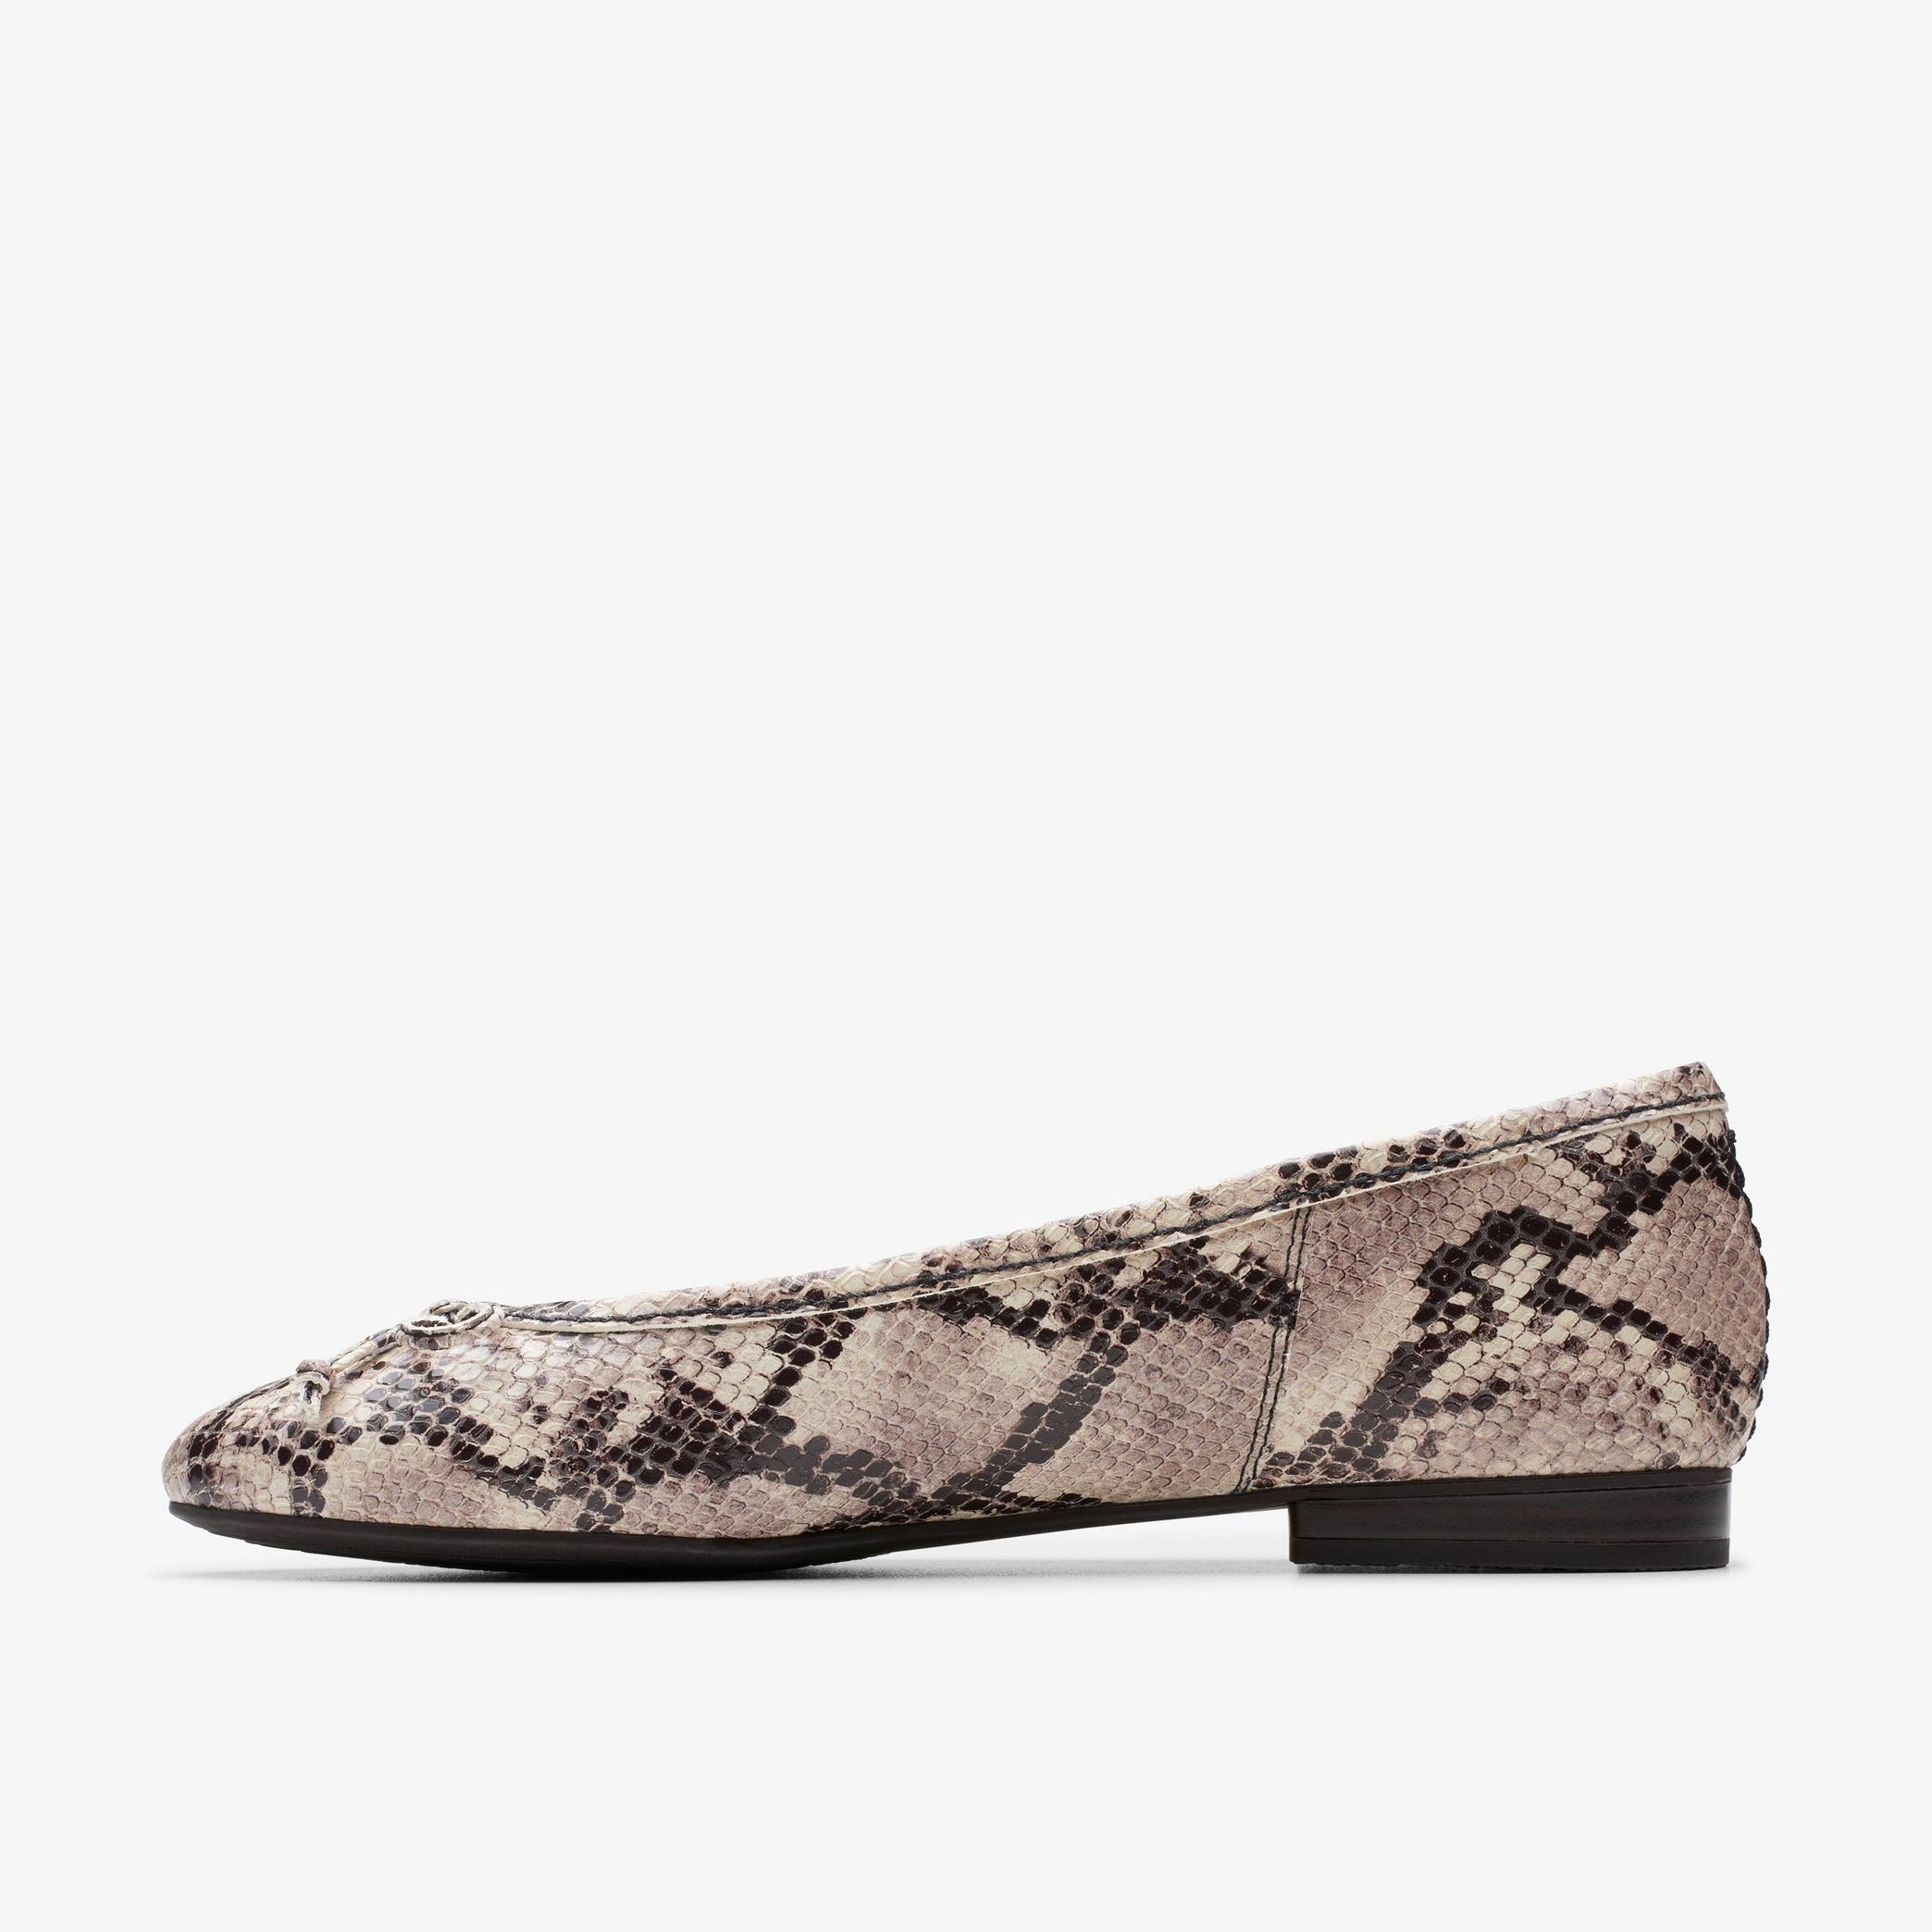 Fawna Lily Snake Print Ballerina, view 2 of 7